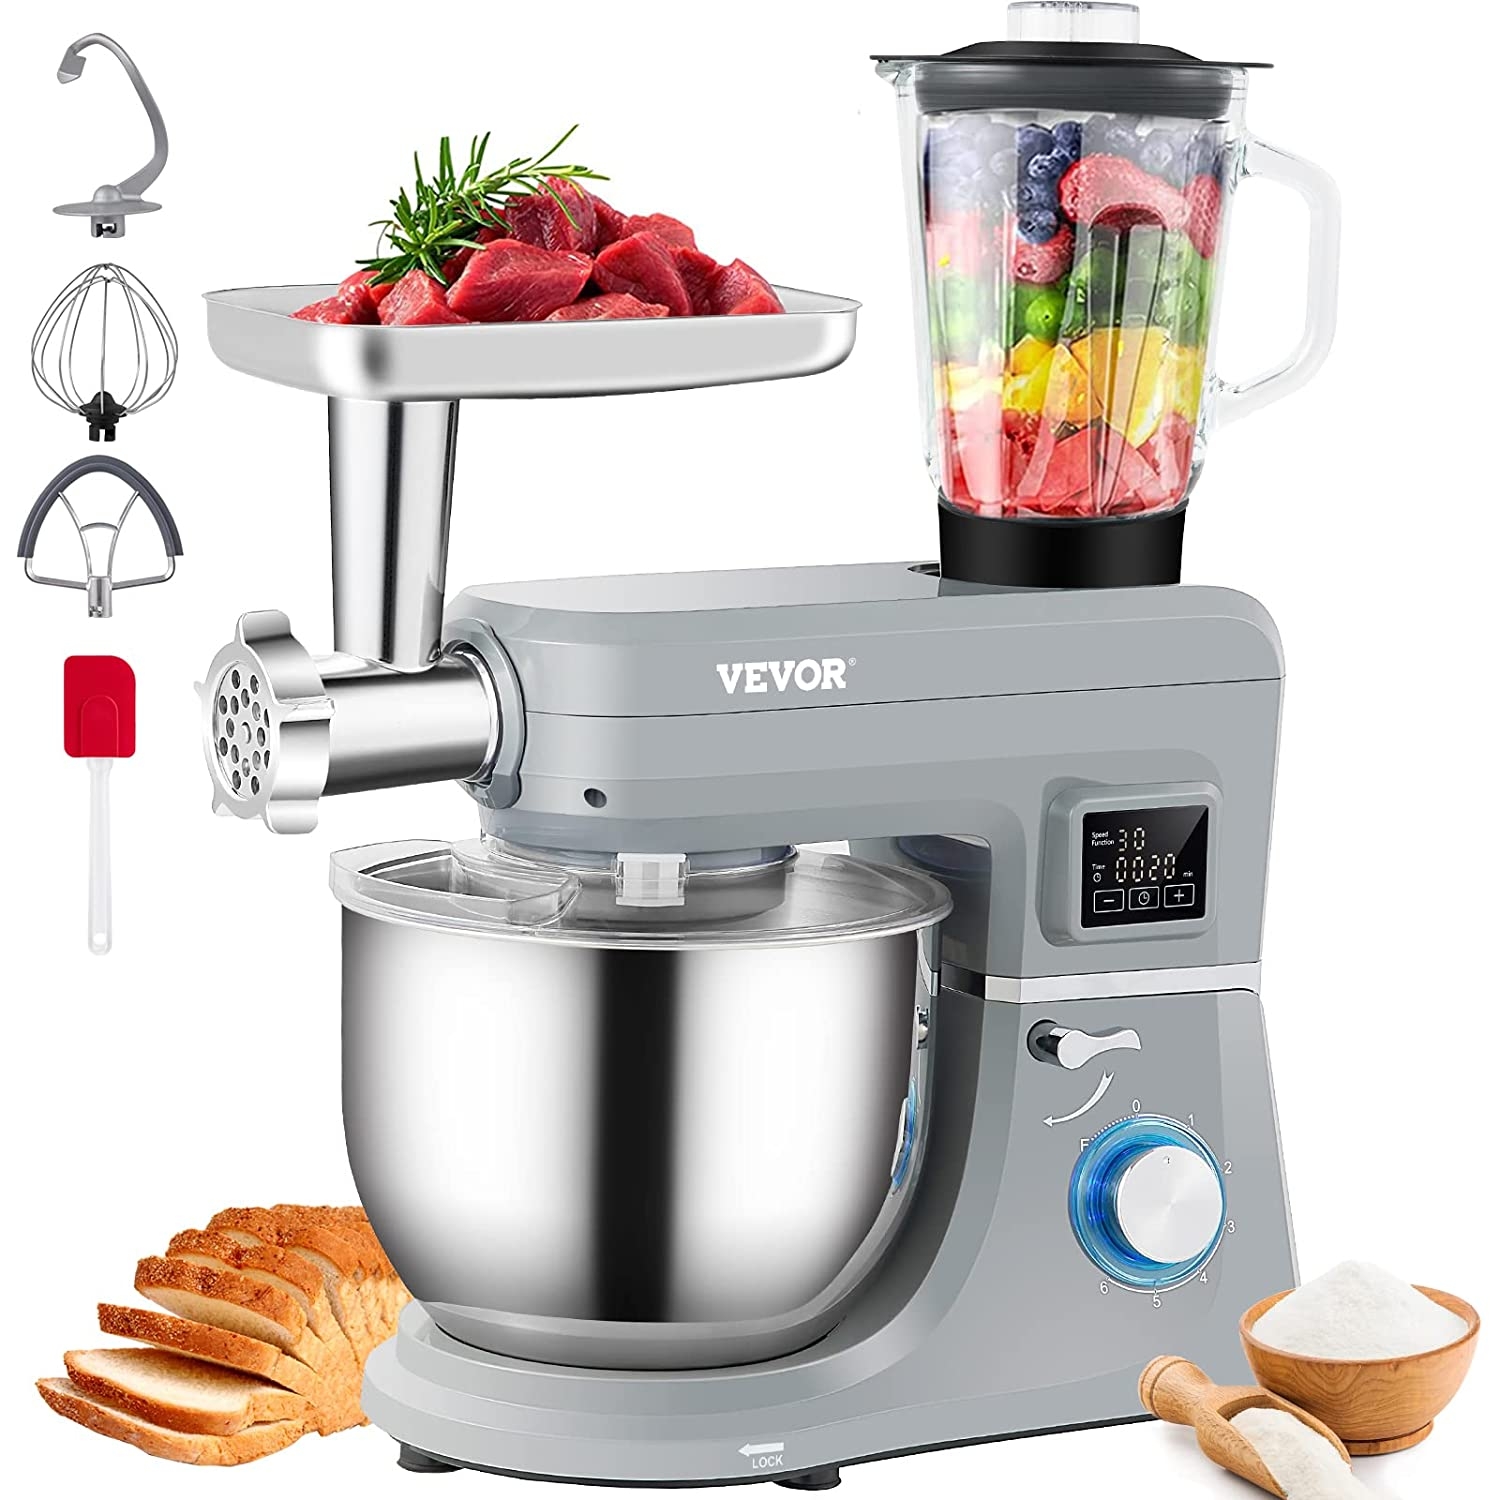 VEVOR Stand Mixer, 660W, 6-Speed Dough Mixer with LCD Screen Timing, All-in-One Food Mixer with 7.4Qt Stainless Bowl Dough Hook